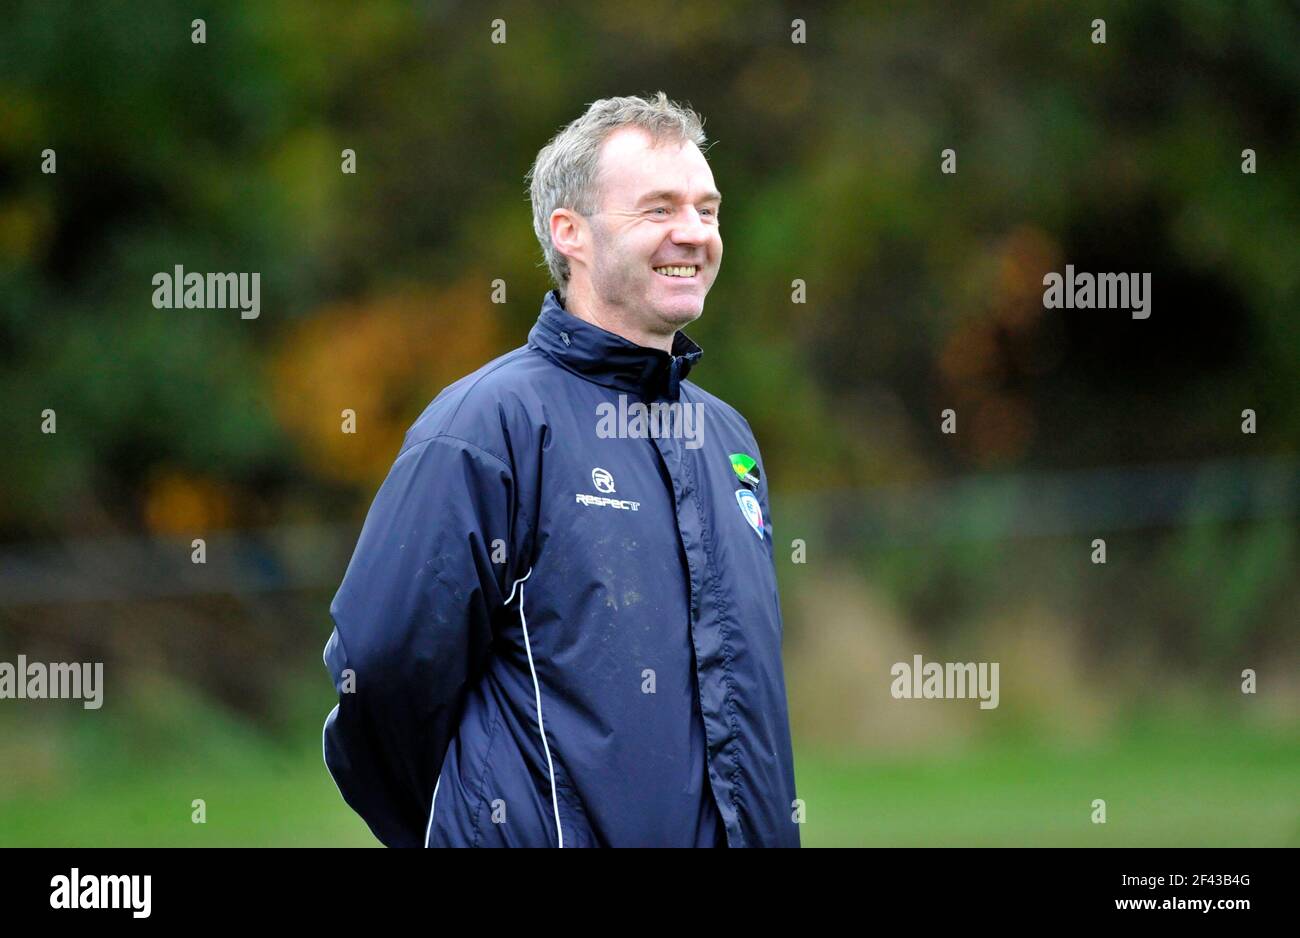 John Sheridan manager of Chesterfield FC training the team.  29/10/2010. PICTURE DAVID ASHDOWN Stock Photo